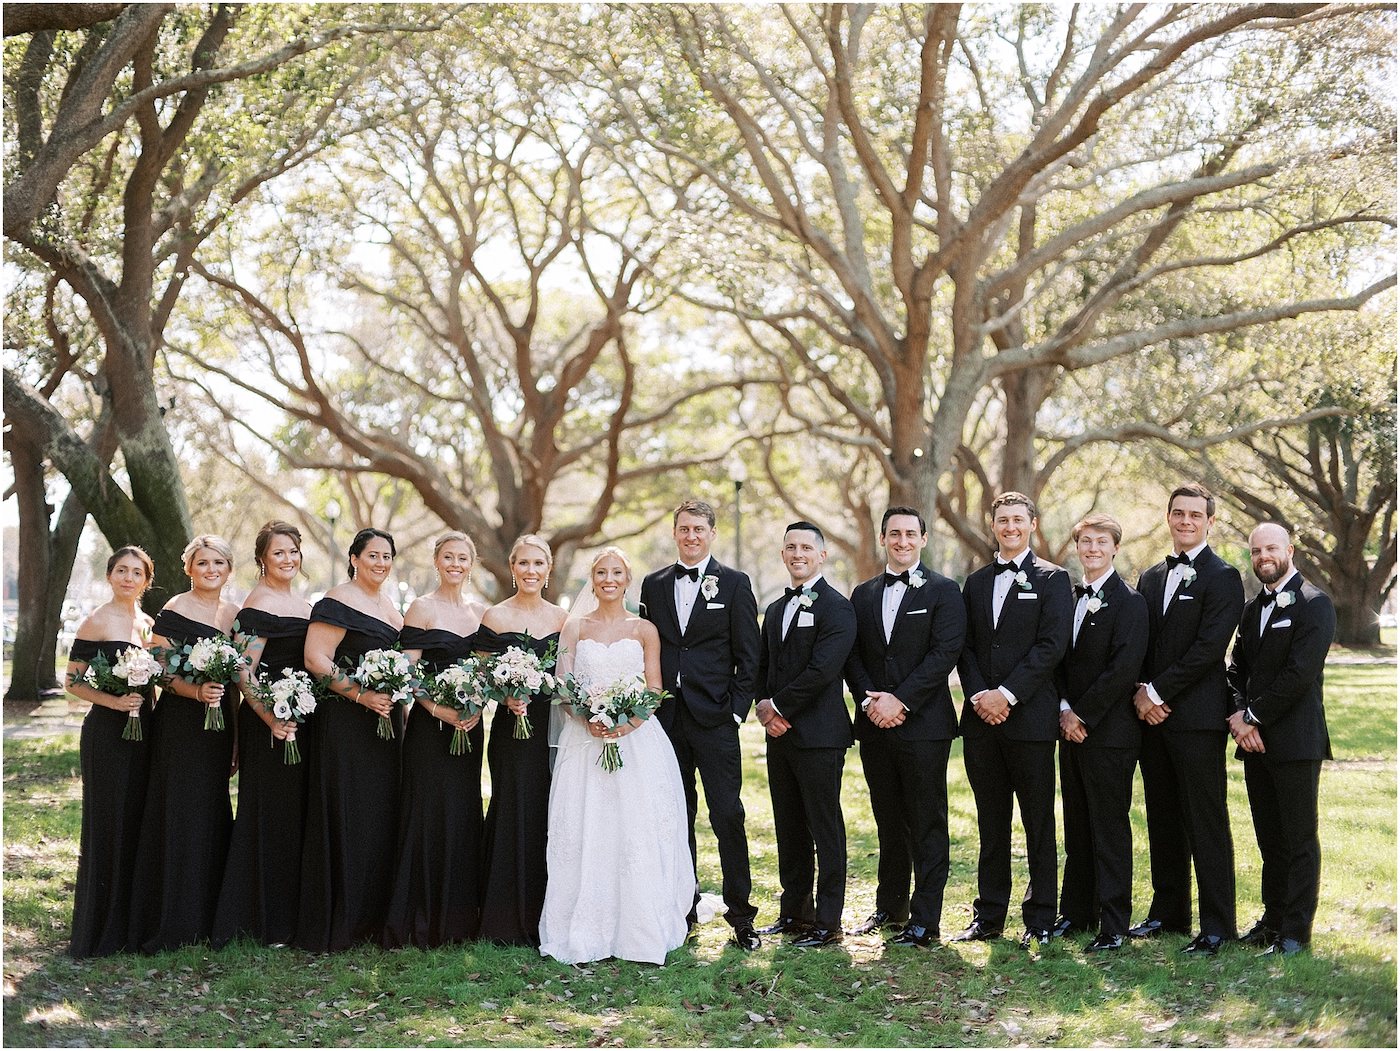 Wedding Party Outdoor Portraits | Black Long Bridesmaid Dresses with Black and White Anemone and Greenery Bouquets | Groomsmen Classic Black Suit Tuxedo with Bow Tie | Tampa Bridesmaids Dress Store Bella Bridesmaids